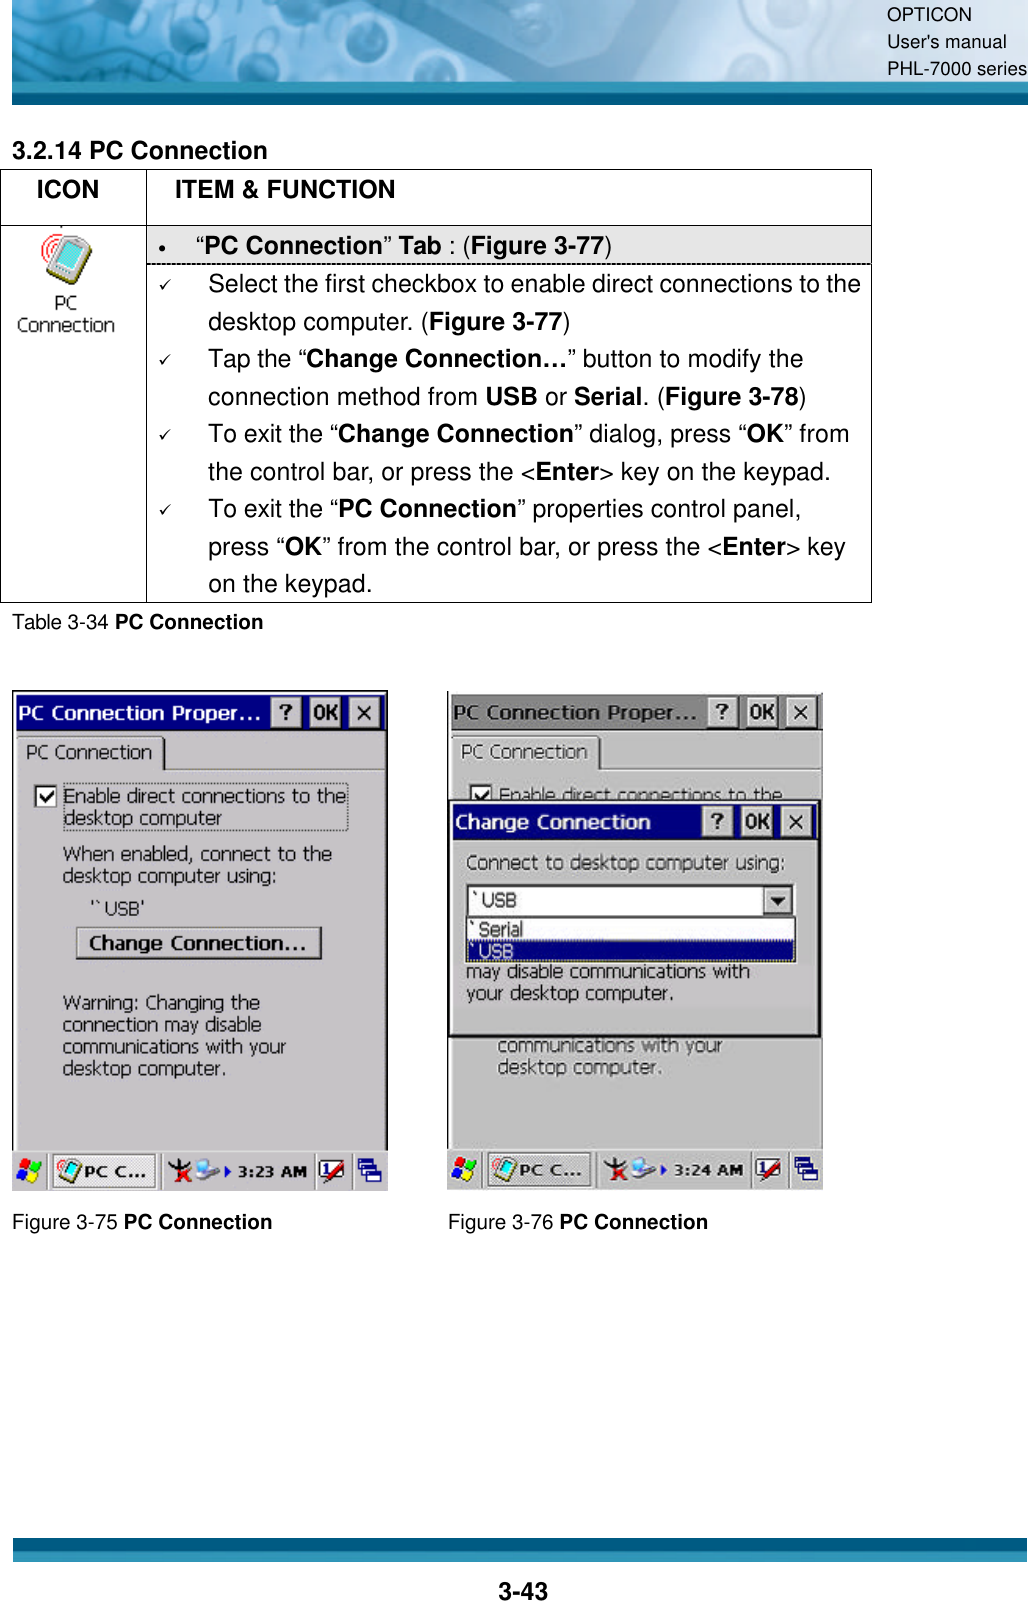 OPTICON User&apos;s manual PHL-7000 series    3-43 3.2.14 PC Connection   ICON  ITEM &amp; FUNCTION • “PC Connection”  Tab : (Figure 3-77)  ü Select the first checkbox to enable direct connections to the desktop computer. (Figure 3-77) ü Tap the “Change Connection… ” button to modify the connection method from USB or Serial. (Figure 3-78) ü To exit the “Change Connection” dialog, press “OK” from the control bar, or press the &lt;Enter&gt; key on the keypad. ü To exit the “PC Connection” properties control panel, press “OK” from the control bar, or press the &lt;Enter&gt; key on the keypad. Table 3-34 PC Connection    Figure 3-75 PC Connection Figure 3-76 PC Connection   